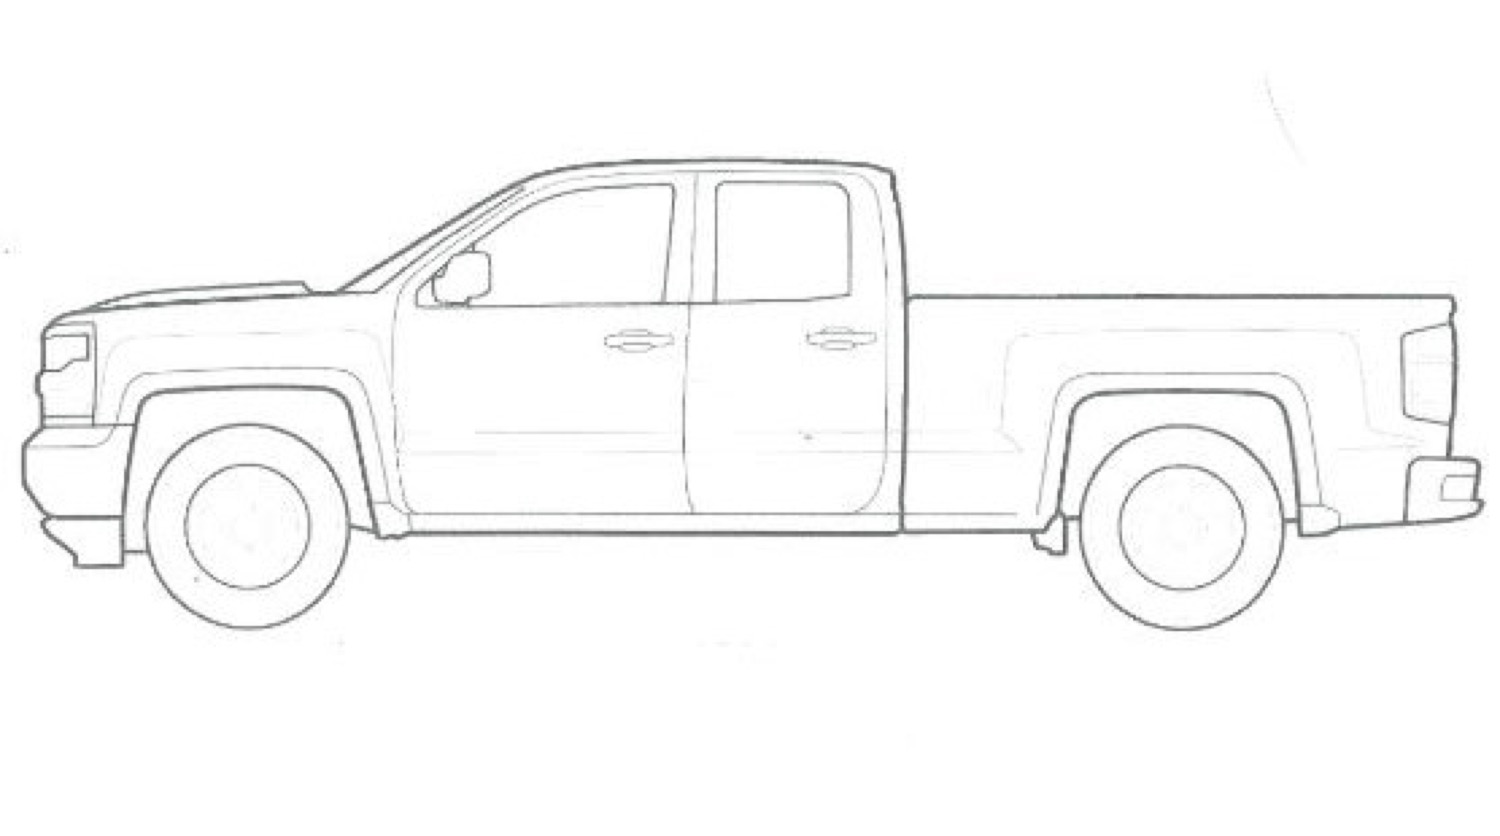 chevy avalanche coloring pages